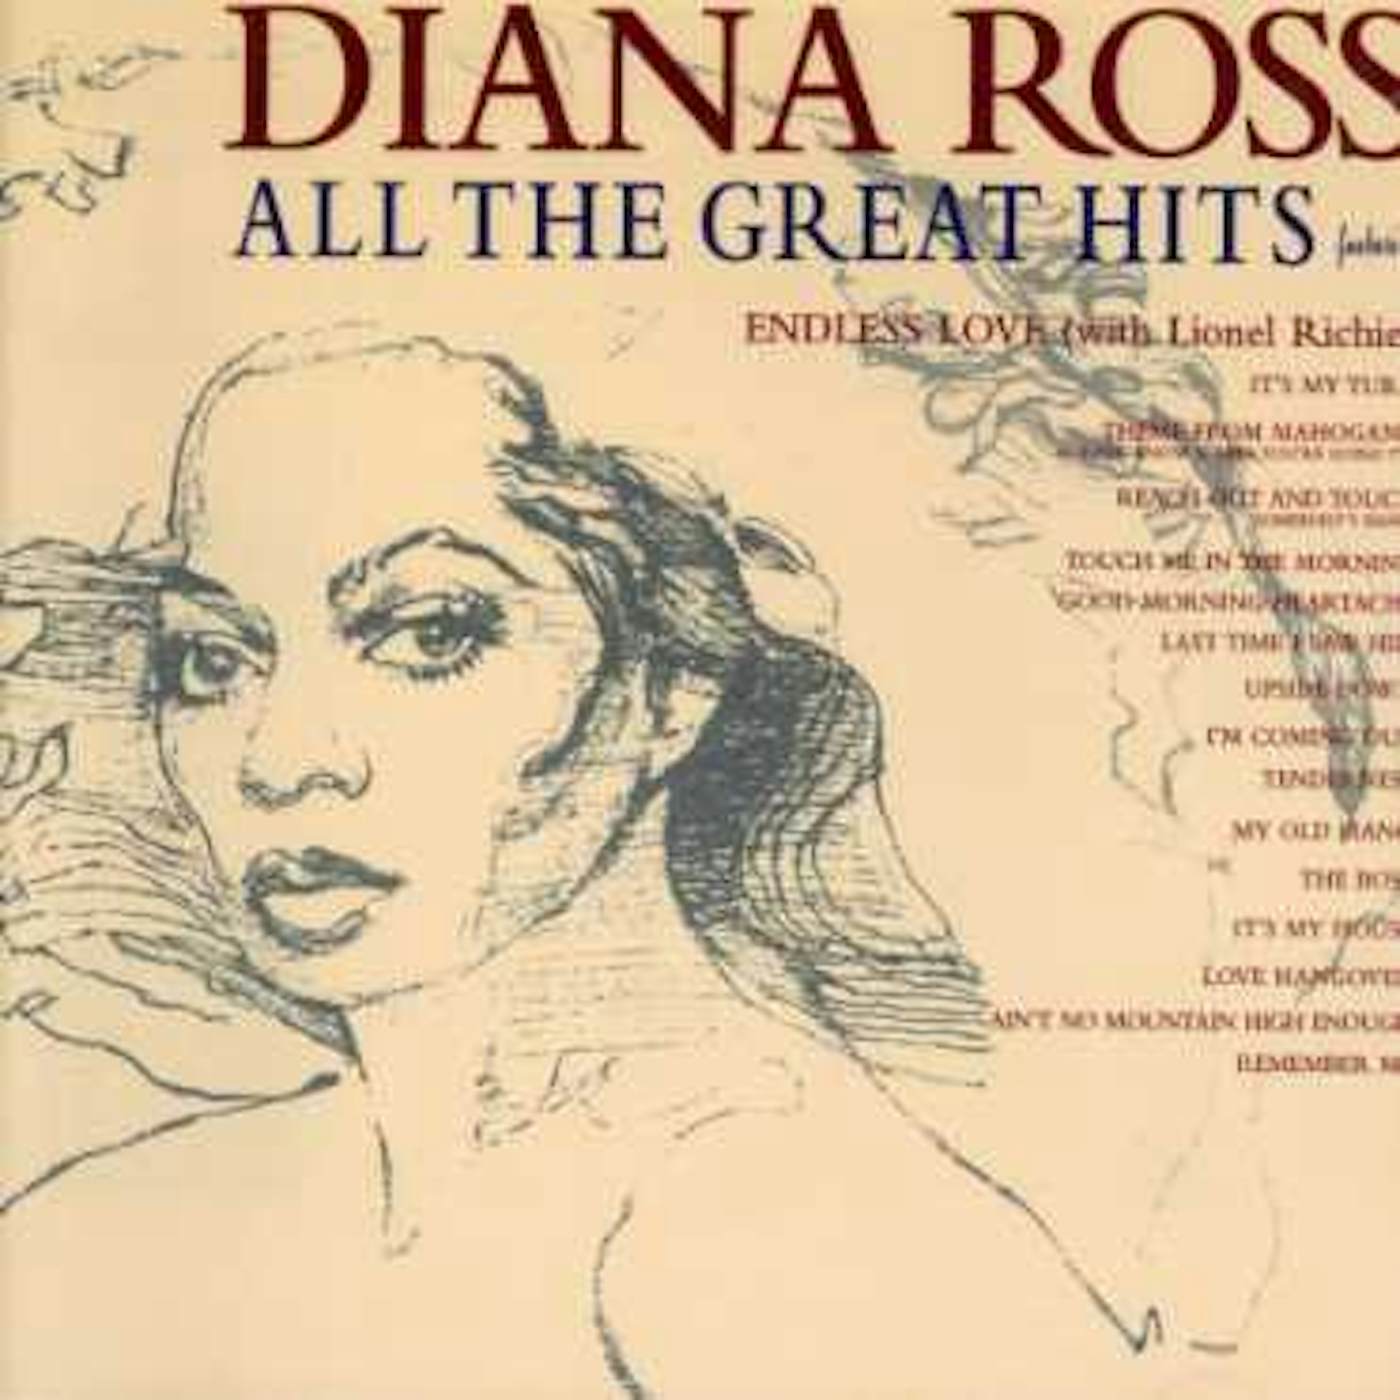 Diana Ross ALL THE GREAT HITS CD